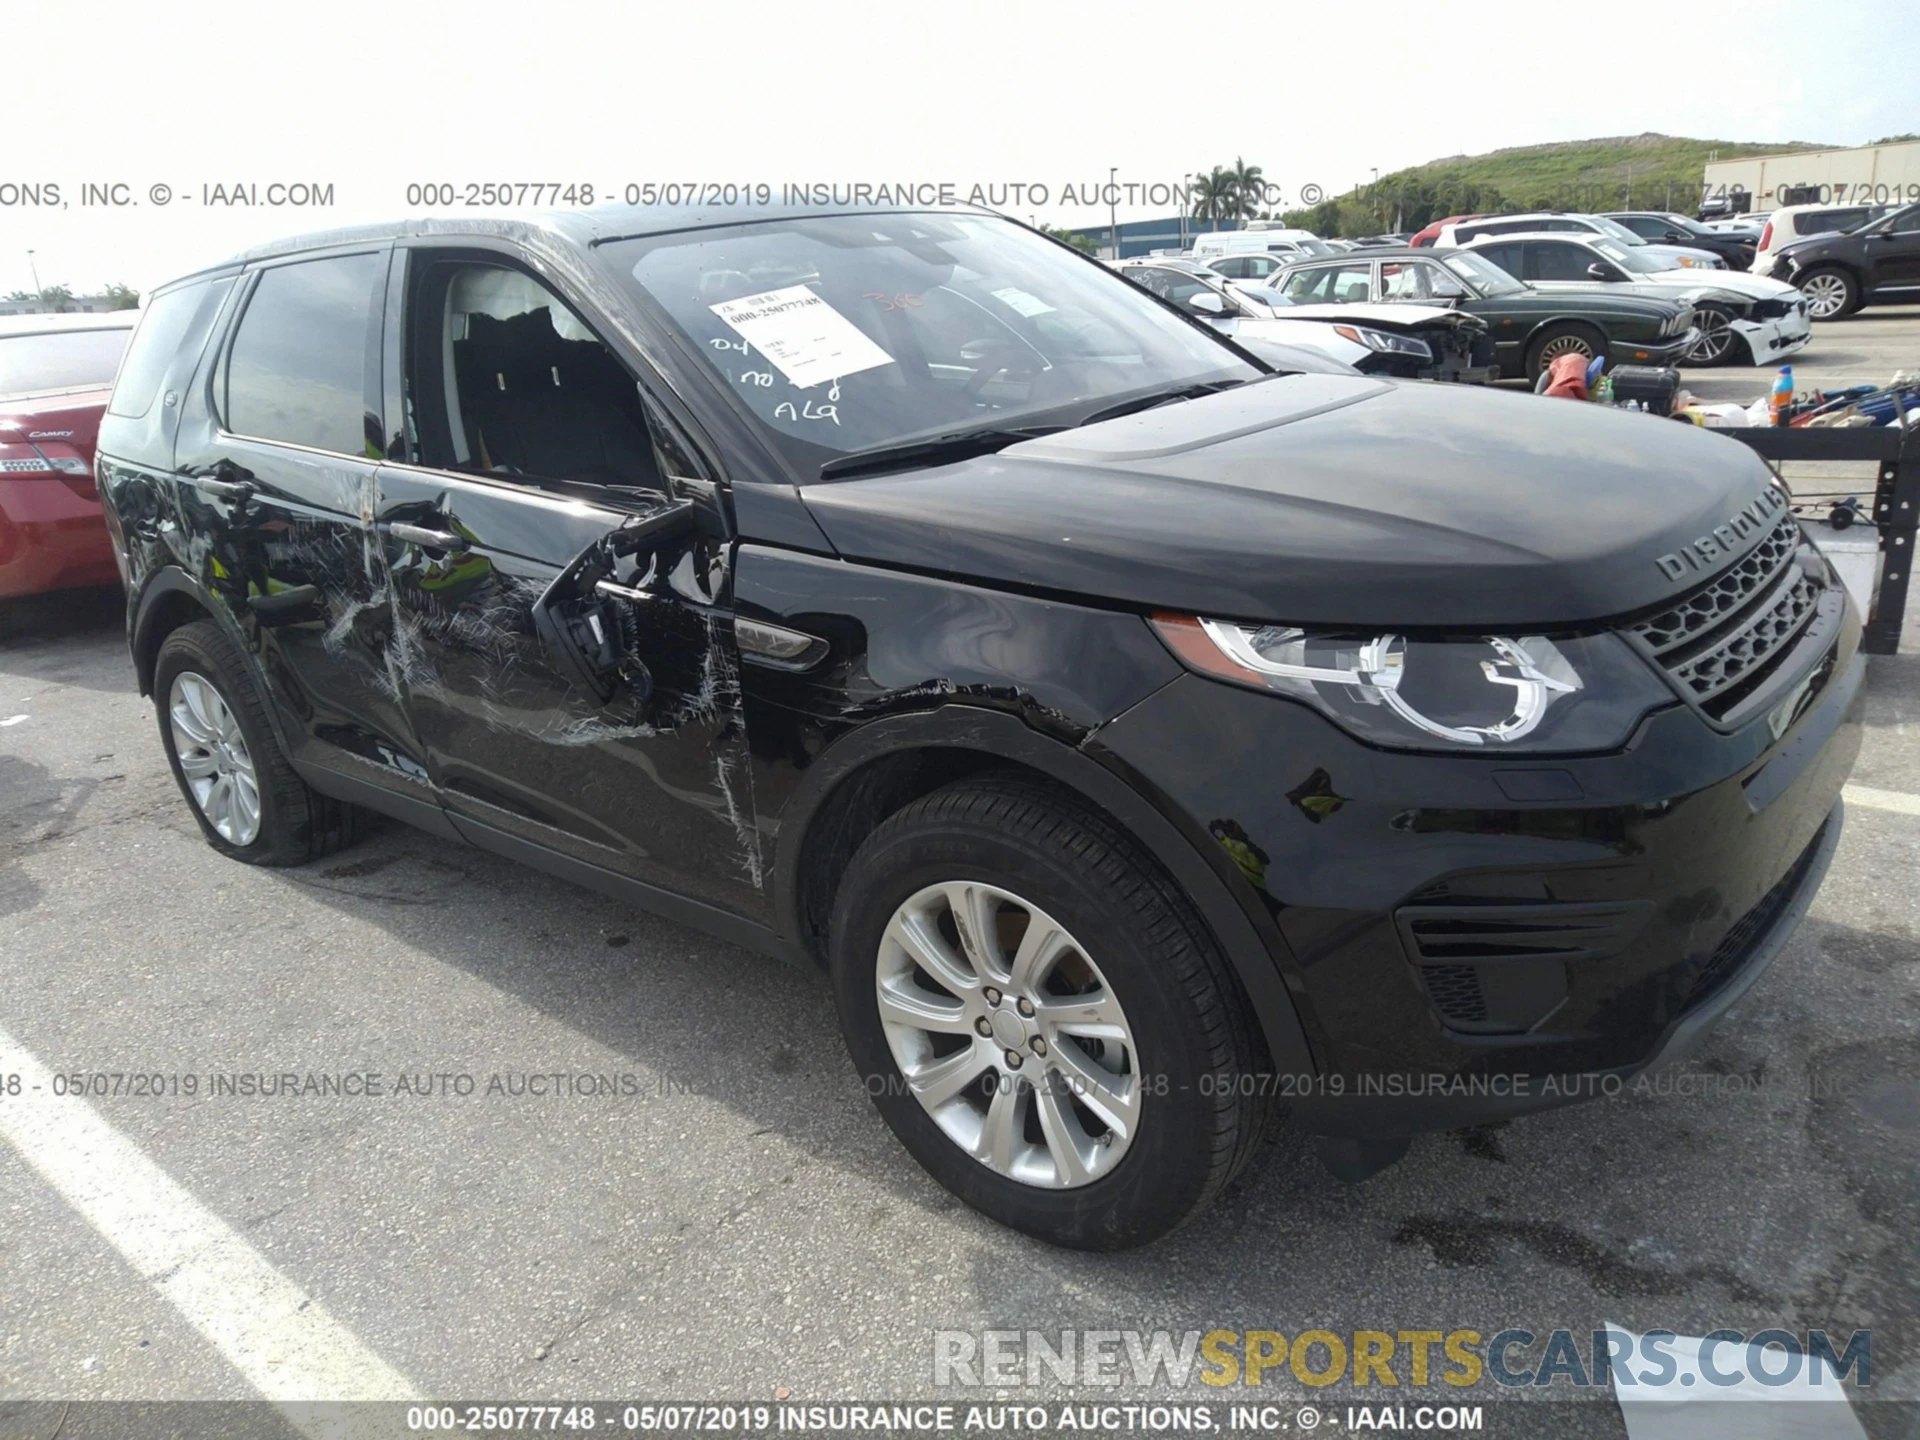 1 Photograph of a damaged car SALCP2FX0KH792818 LAND ROVER DISCOVERY SPORT 2019